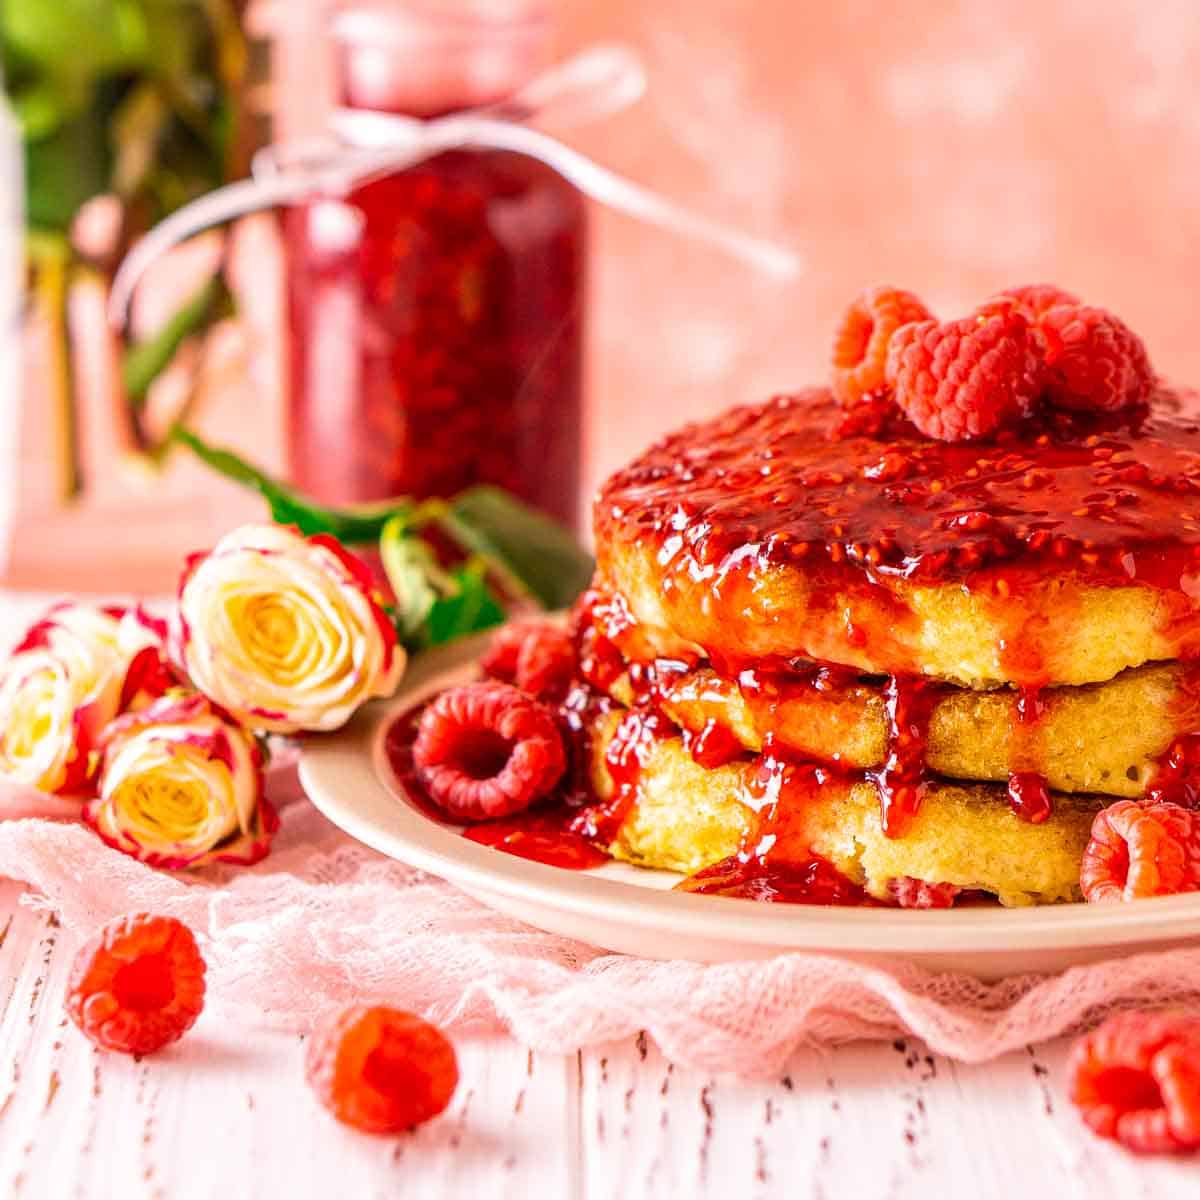 A stack of raspberry pancakes on a plate with flowers and berries around it.